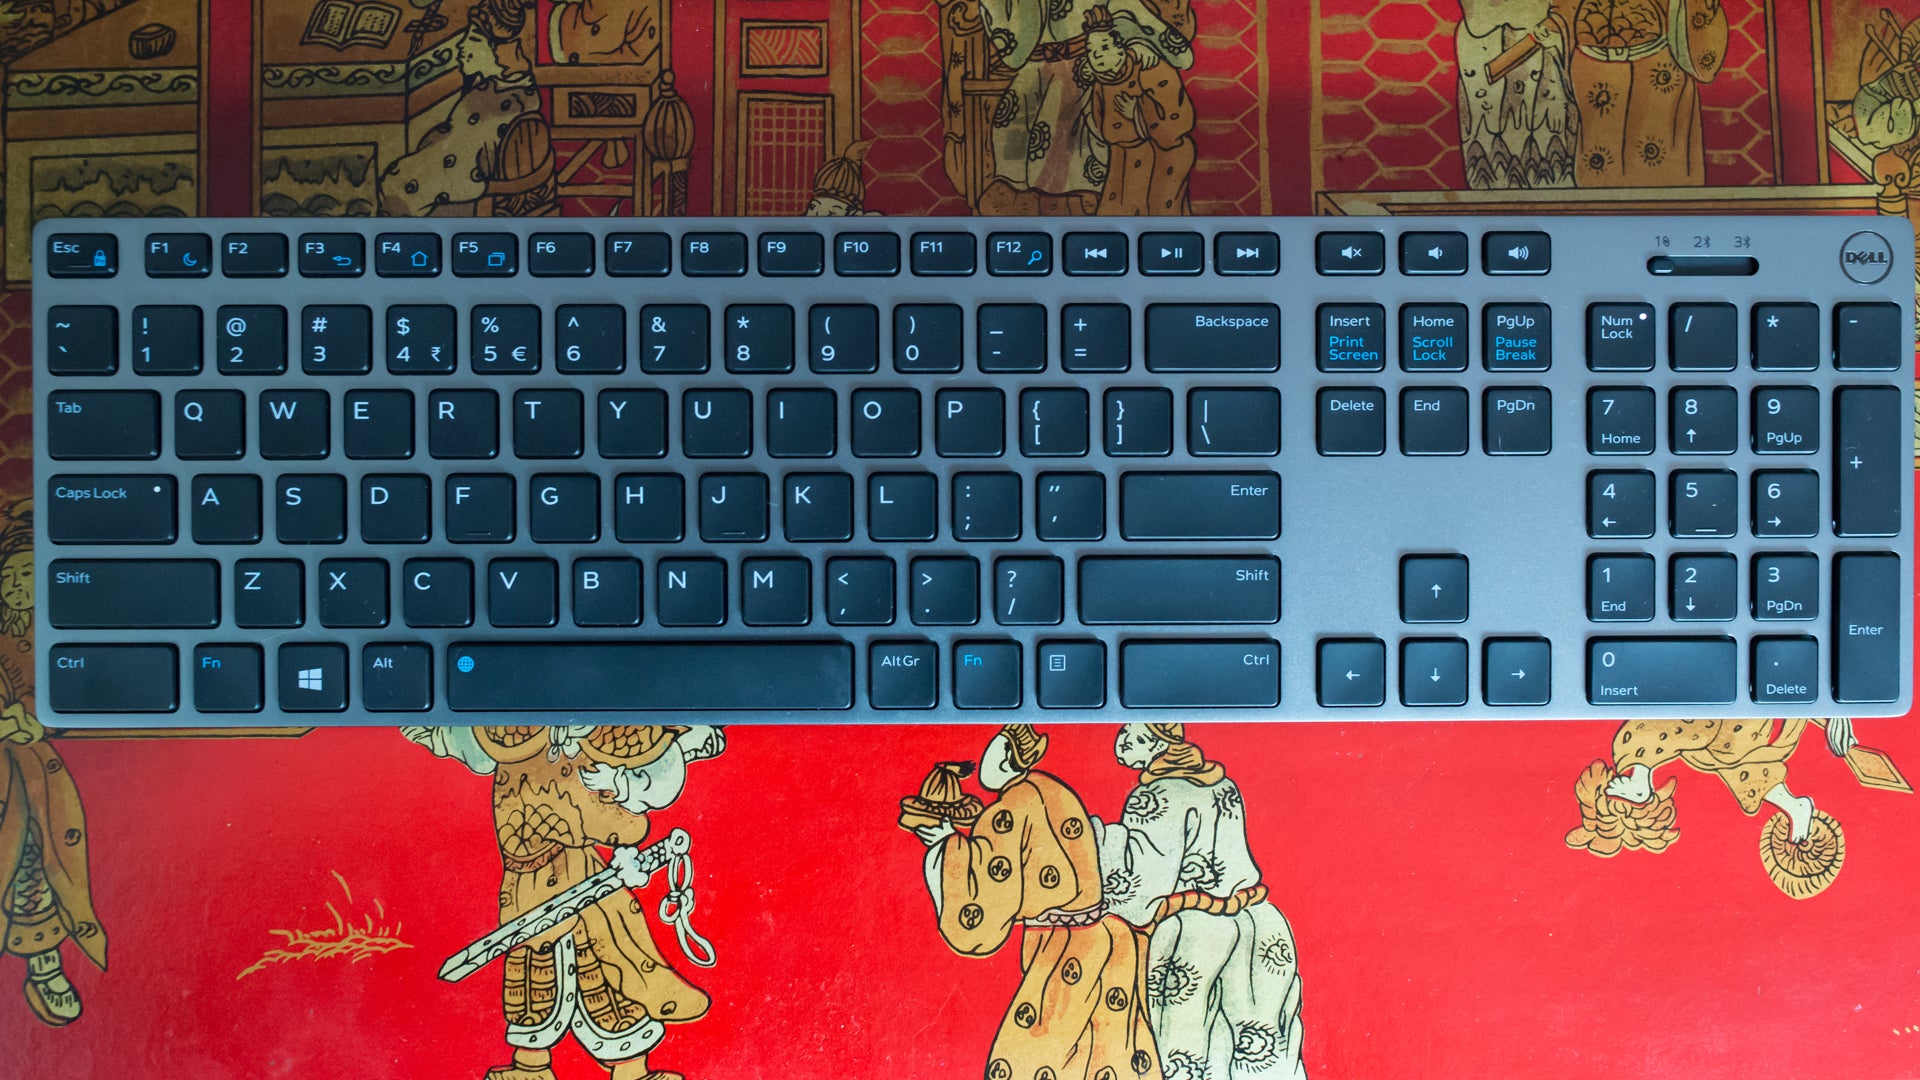 Dell XPS keyboard on patterned red background.